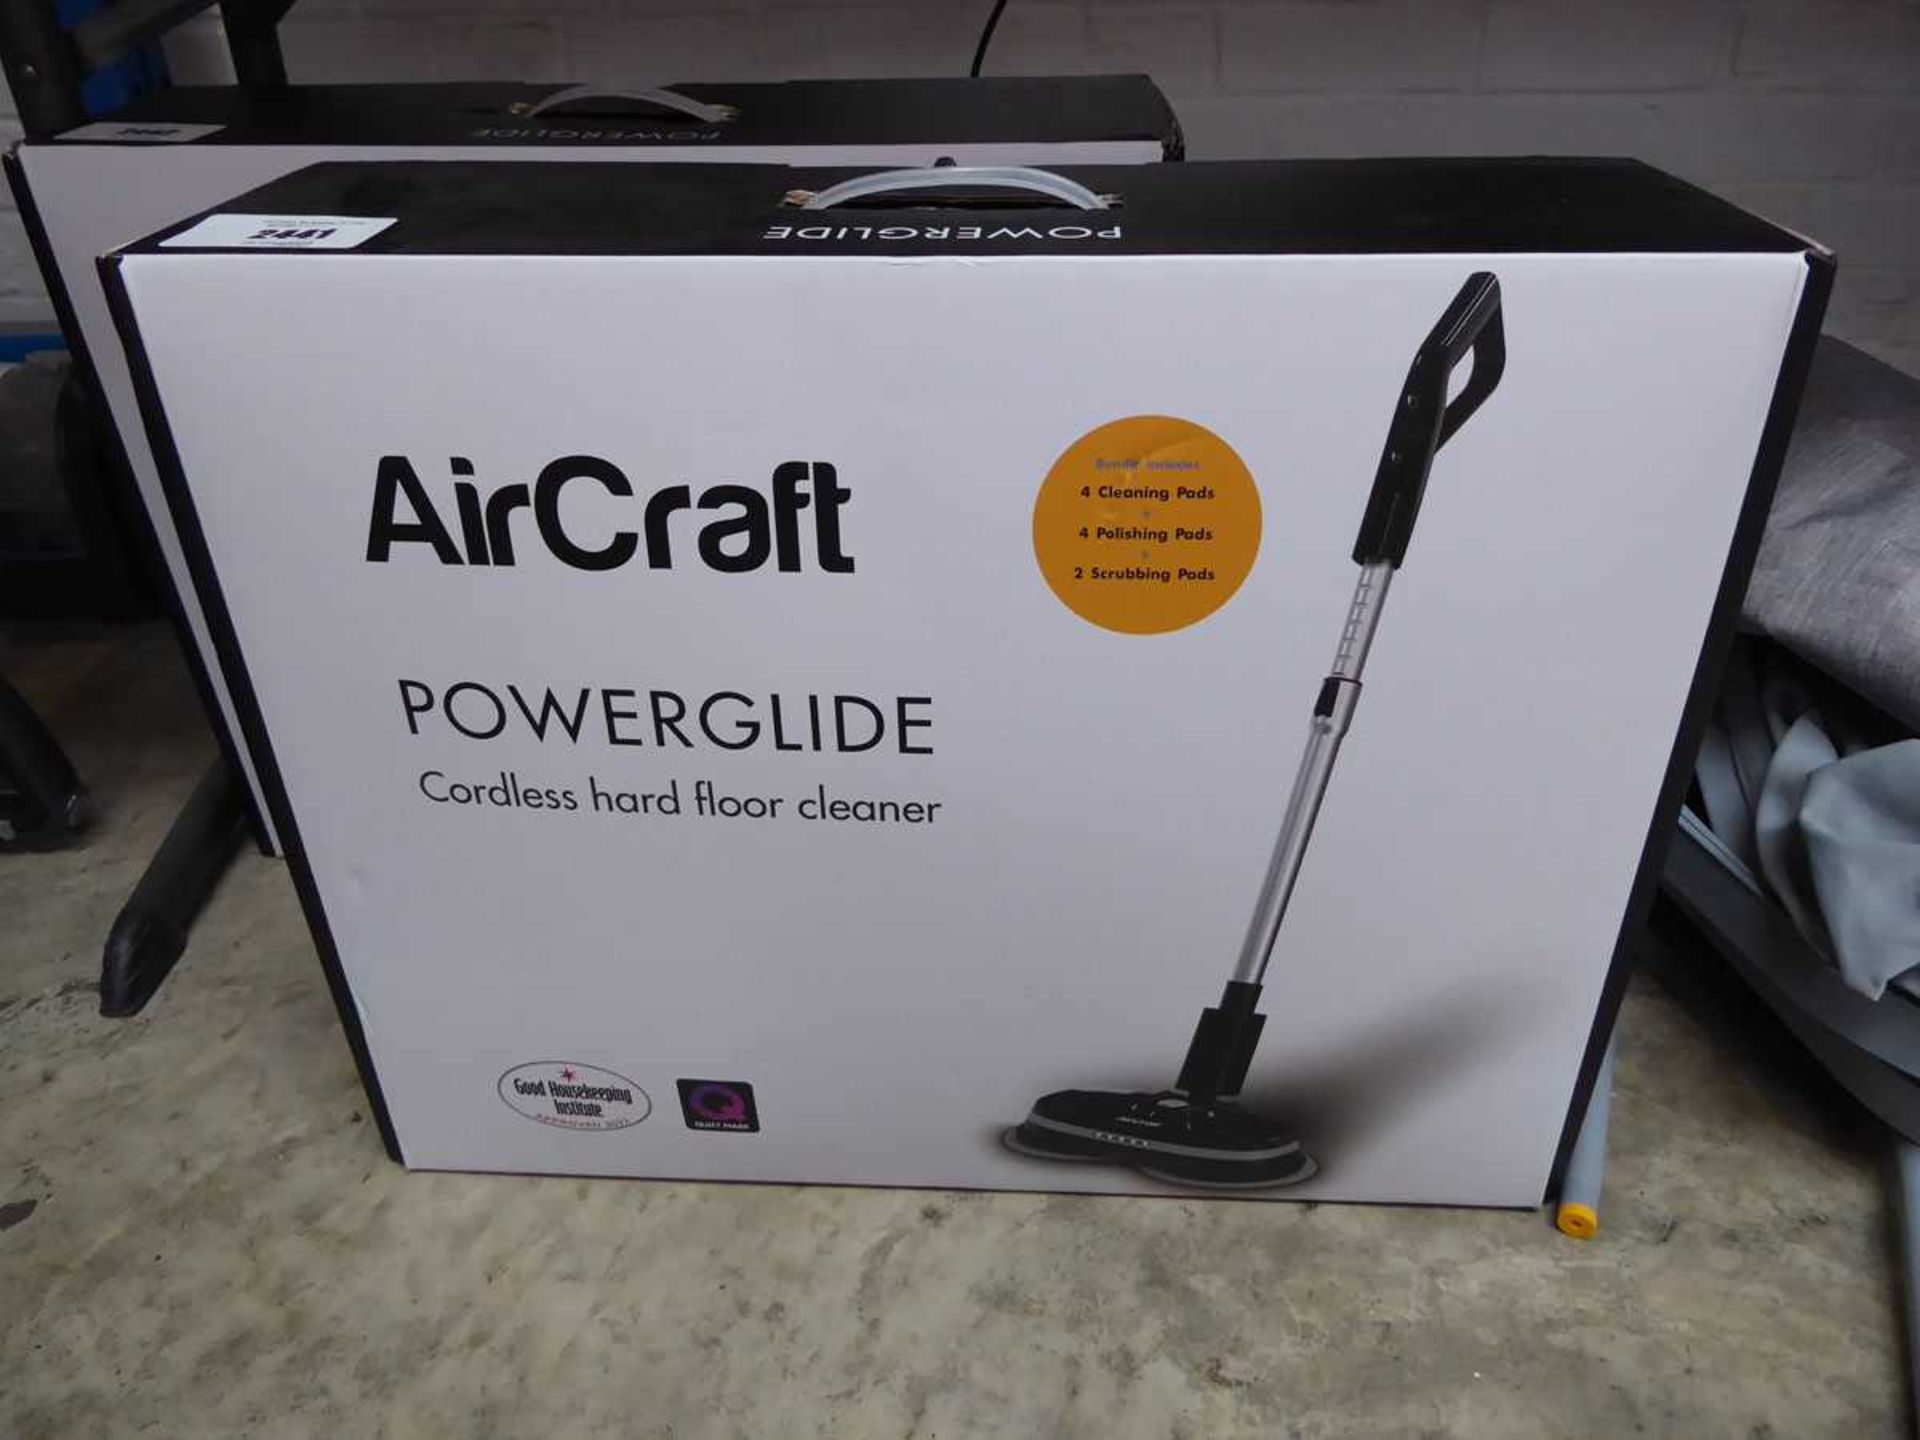 +VAT Boxed Aircraft Power Glide cordless hard floor cleaner